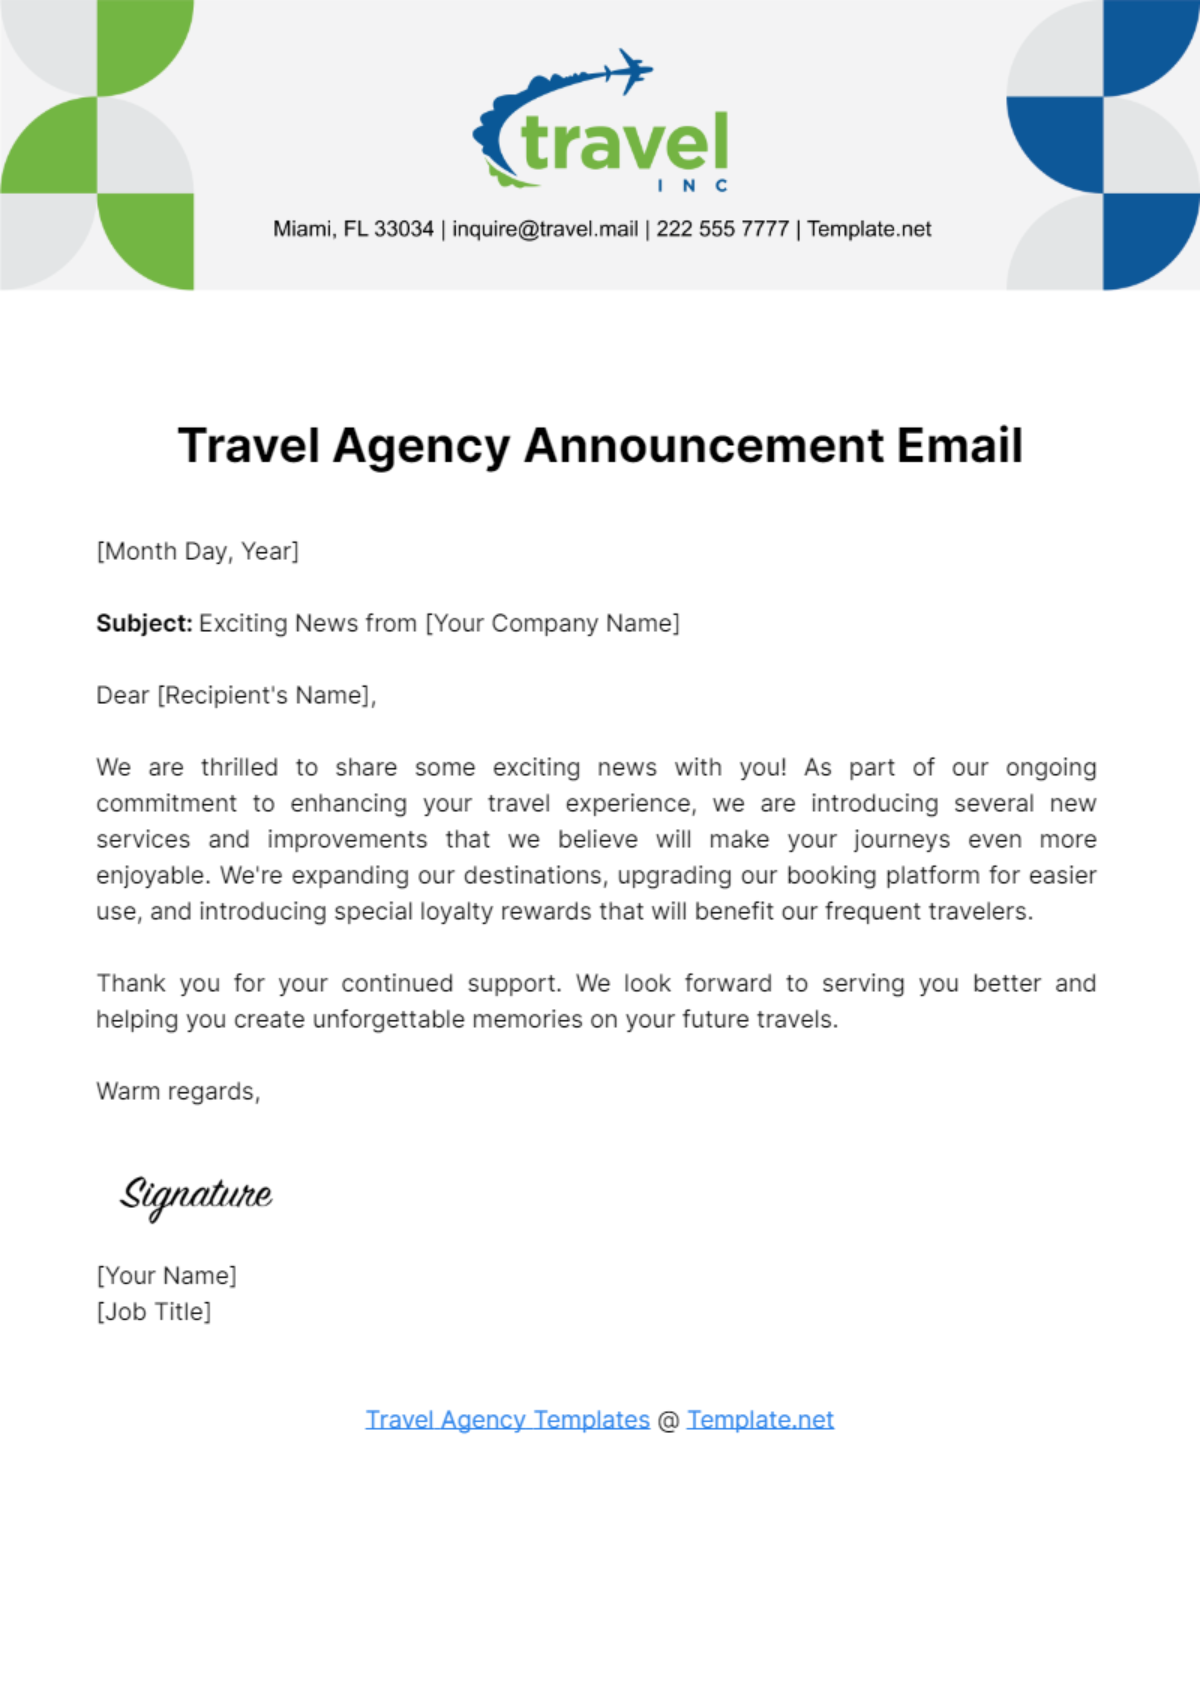 Free Travel Agency Announcement Email Template